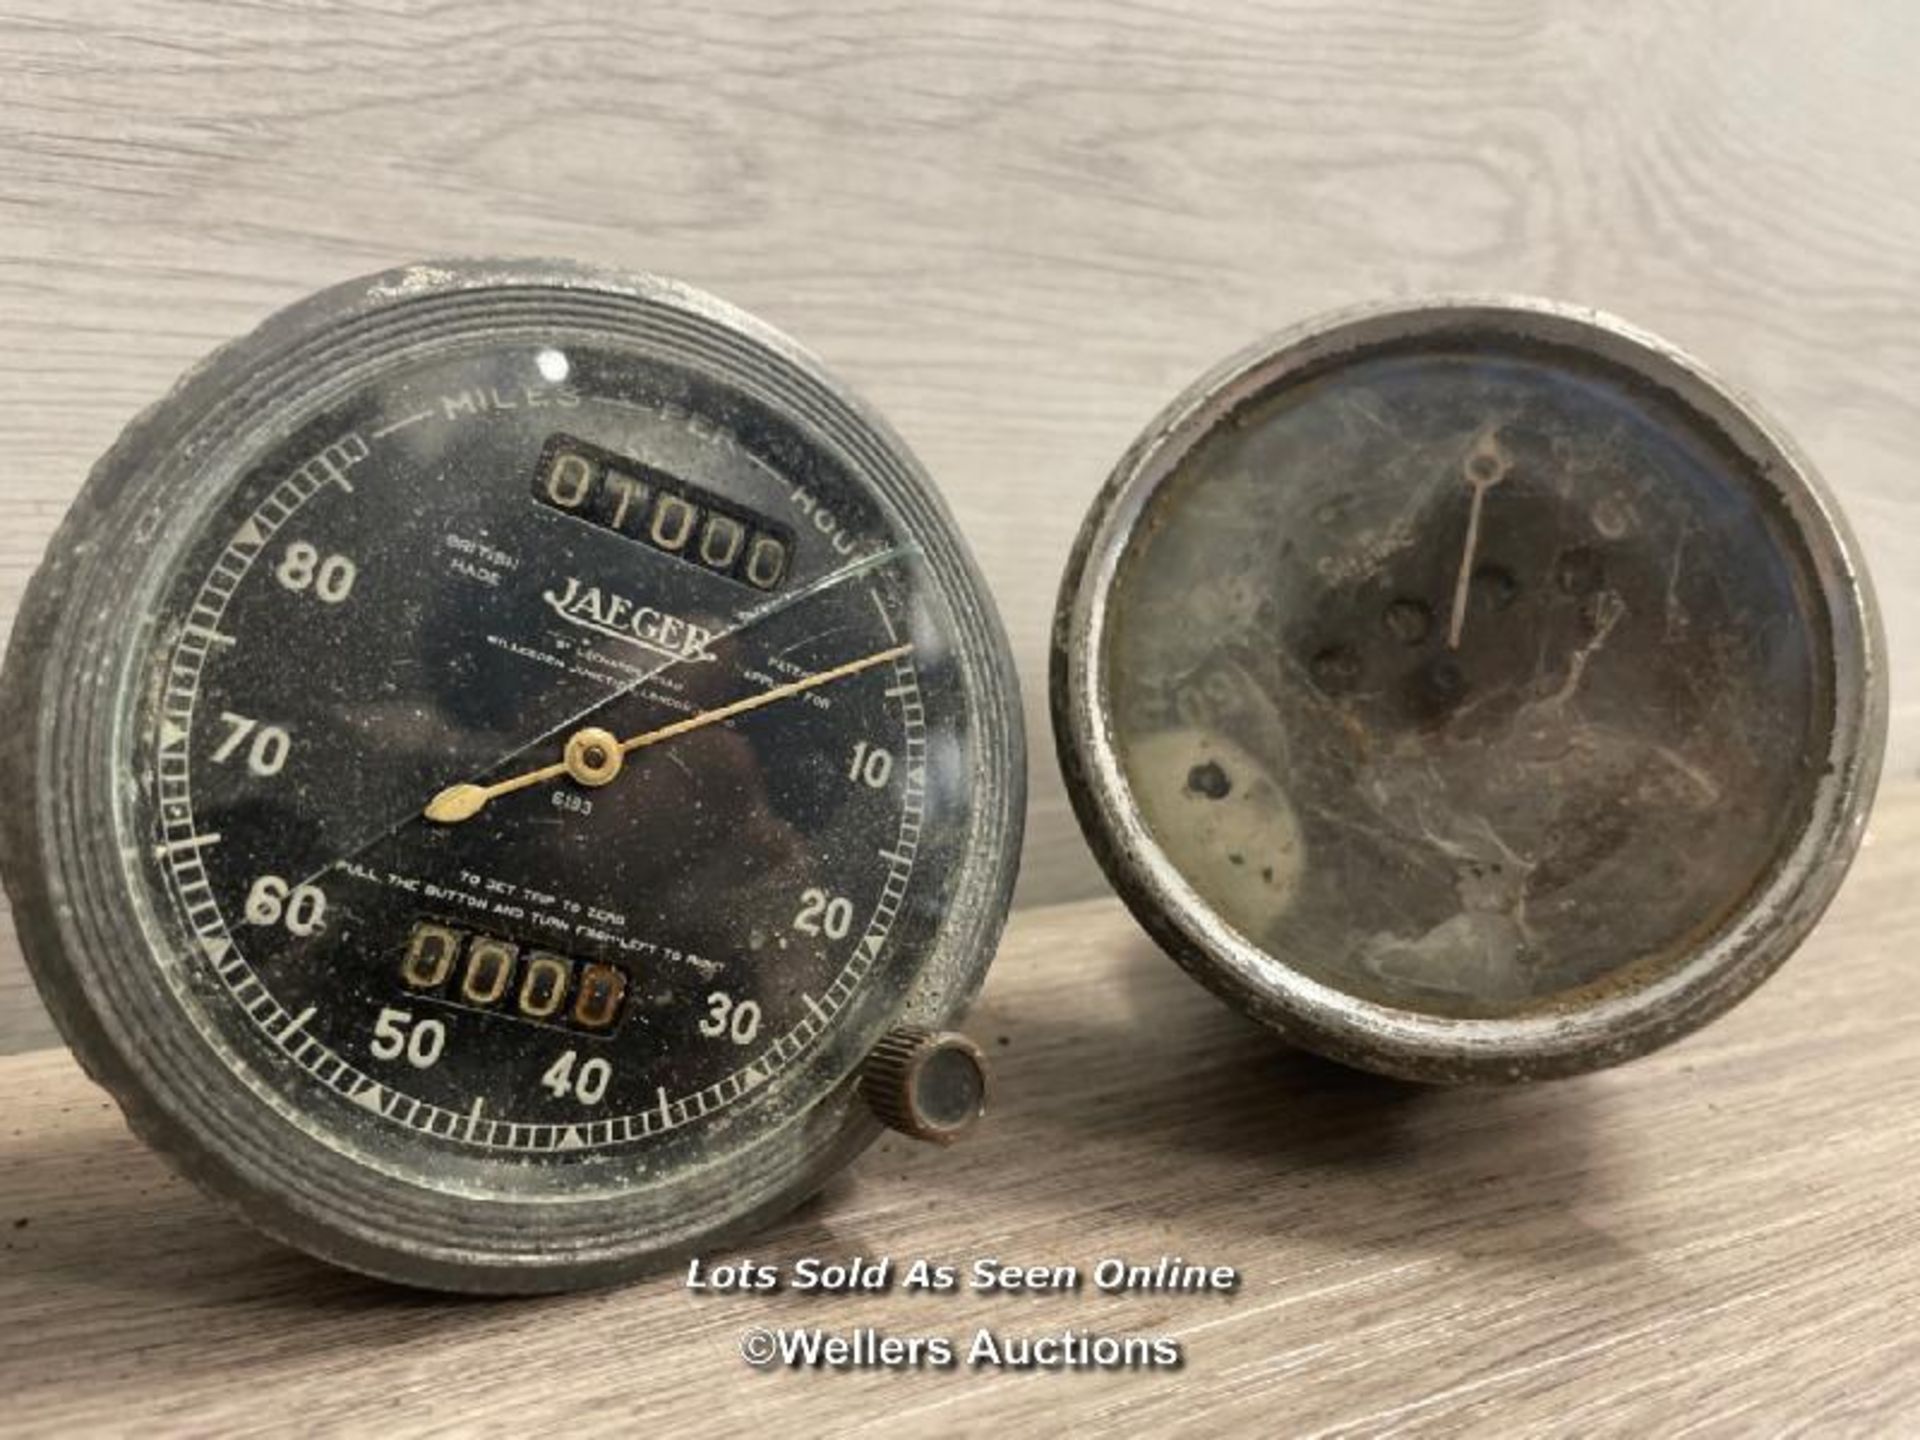 VINTAGE AUTOMOTIVE - FOUR VINTAGE SPEEDOMETERS & ODOMETERS INCLUDING JAEGER AND SMITHS - Image 3 of 3